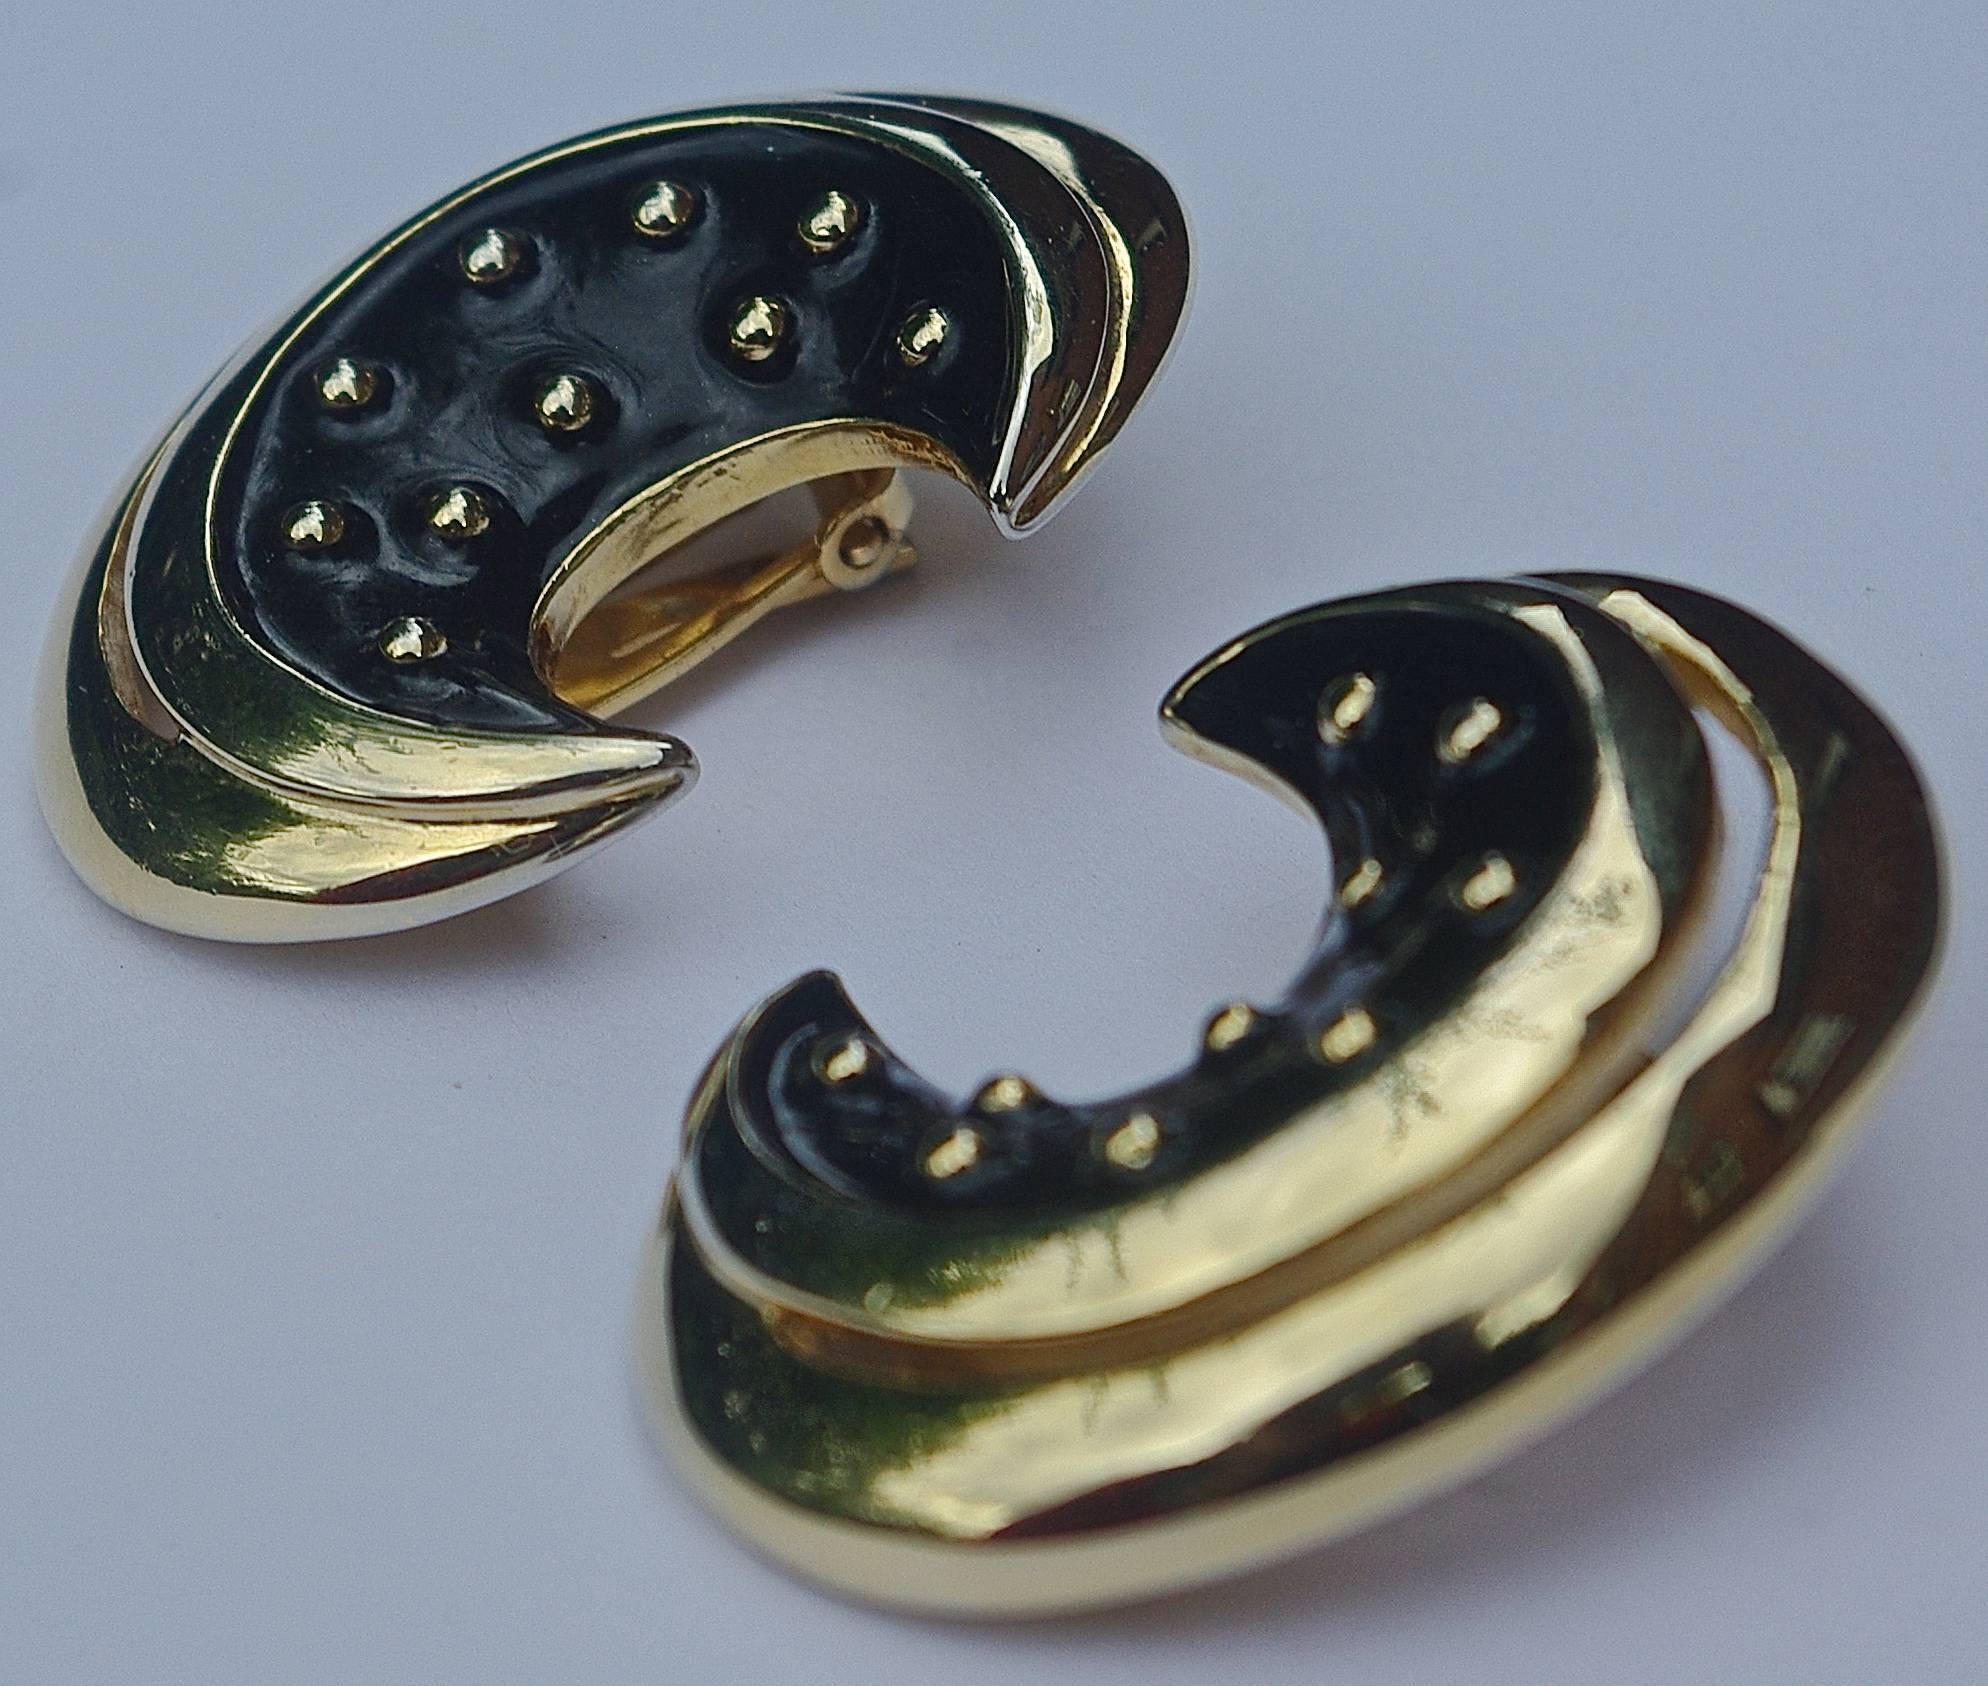 Gold plated and black enamel clip on earrings, by Courrèges Paris. Measuring 4cms / 1.57 inches, by 3cms / 1.18 inches.

The black enamel is decorated with golden balls. This is a stylish and elegant pair of vintage designer statement earrings.